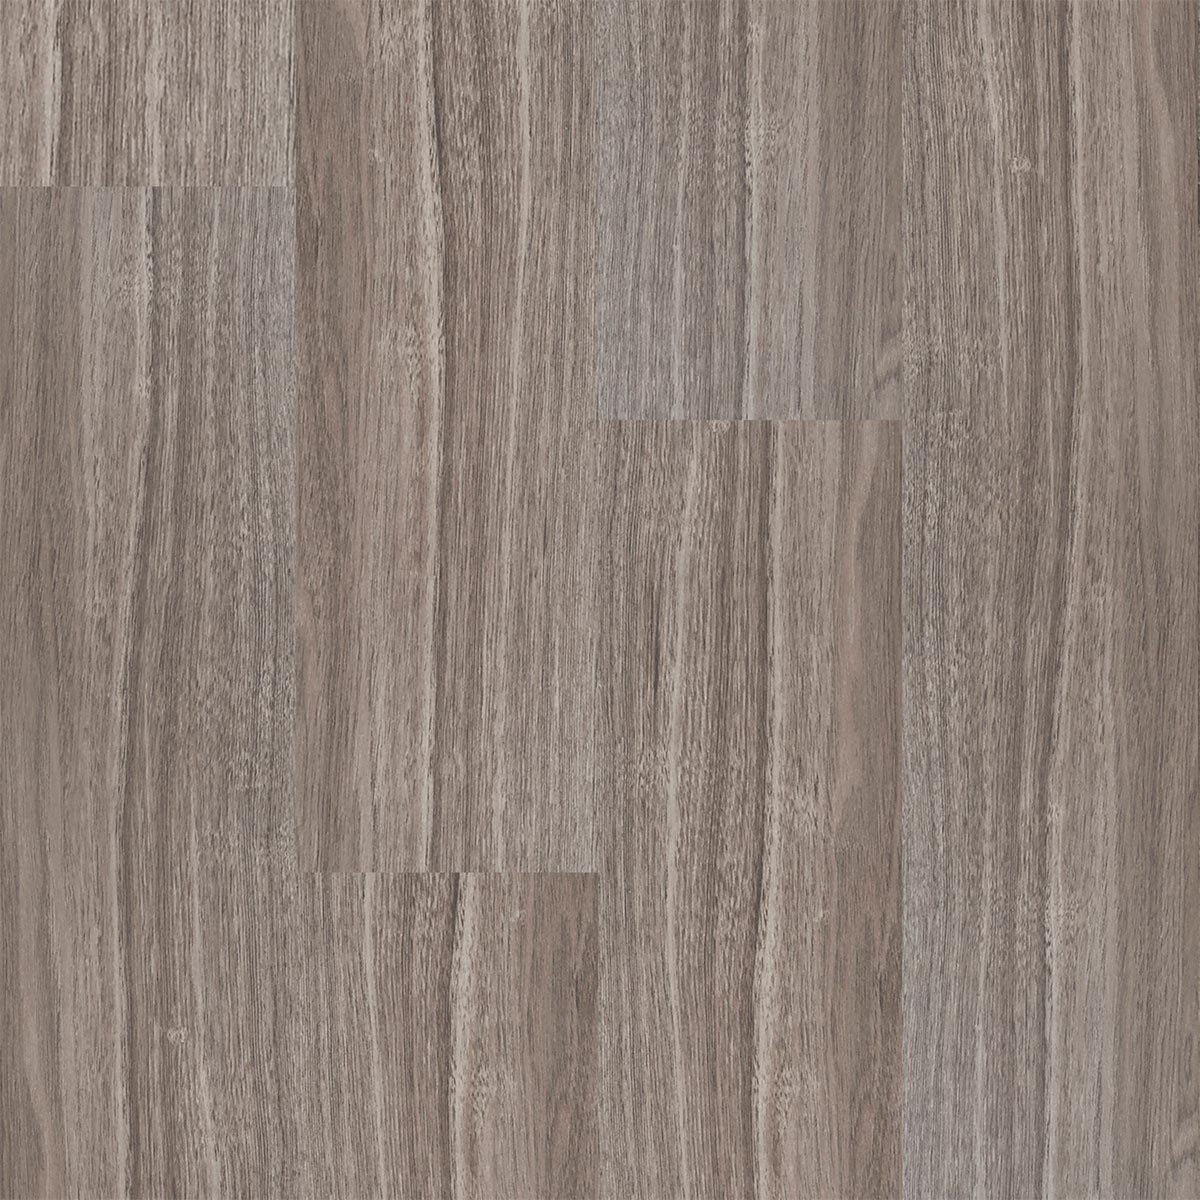 Close up image of planked flooring